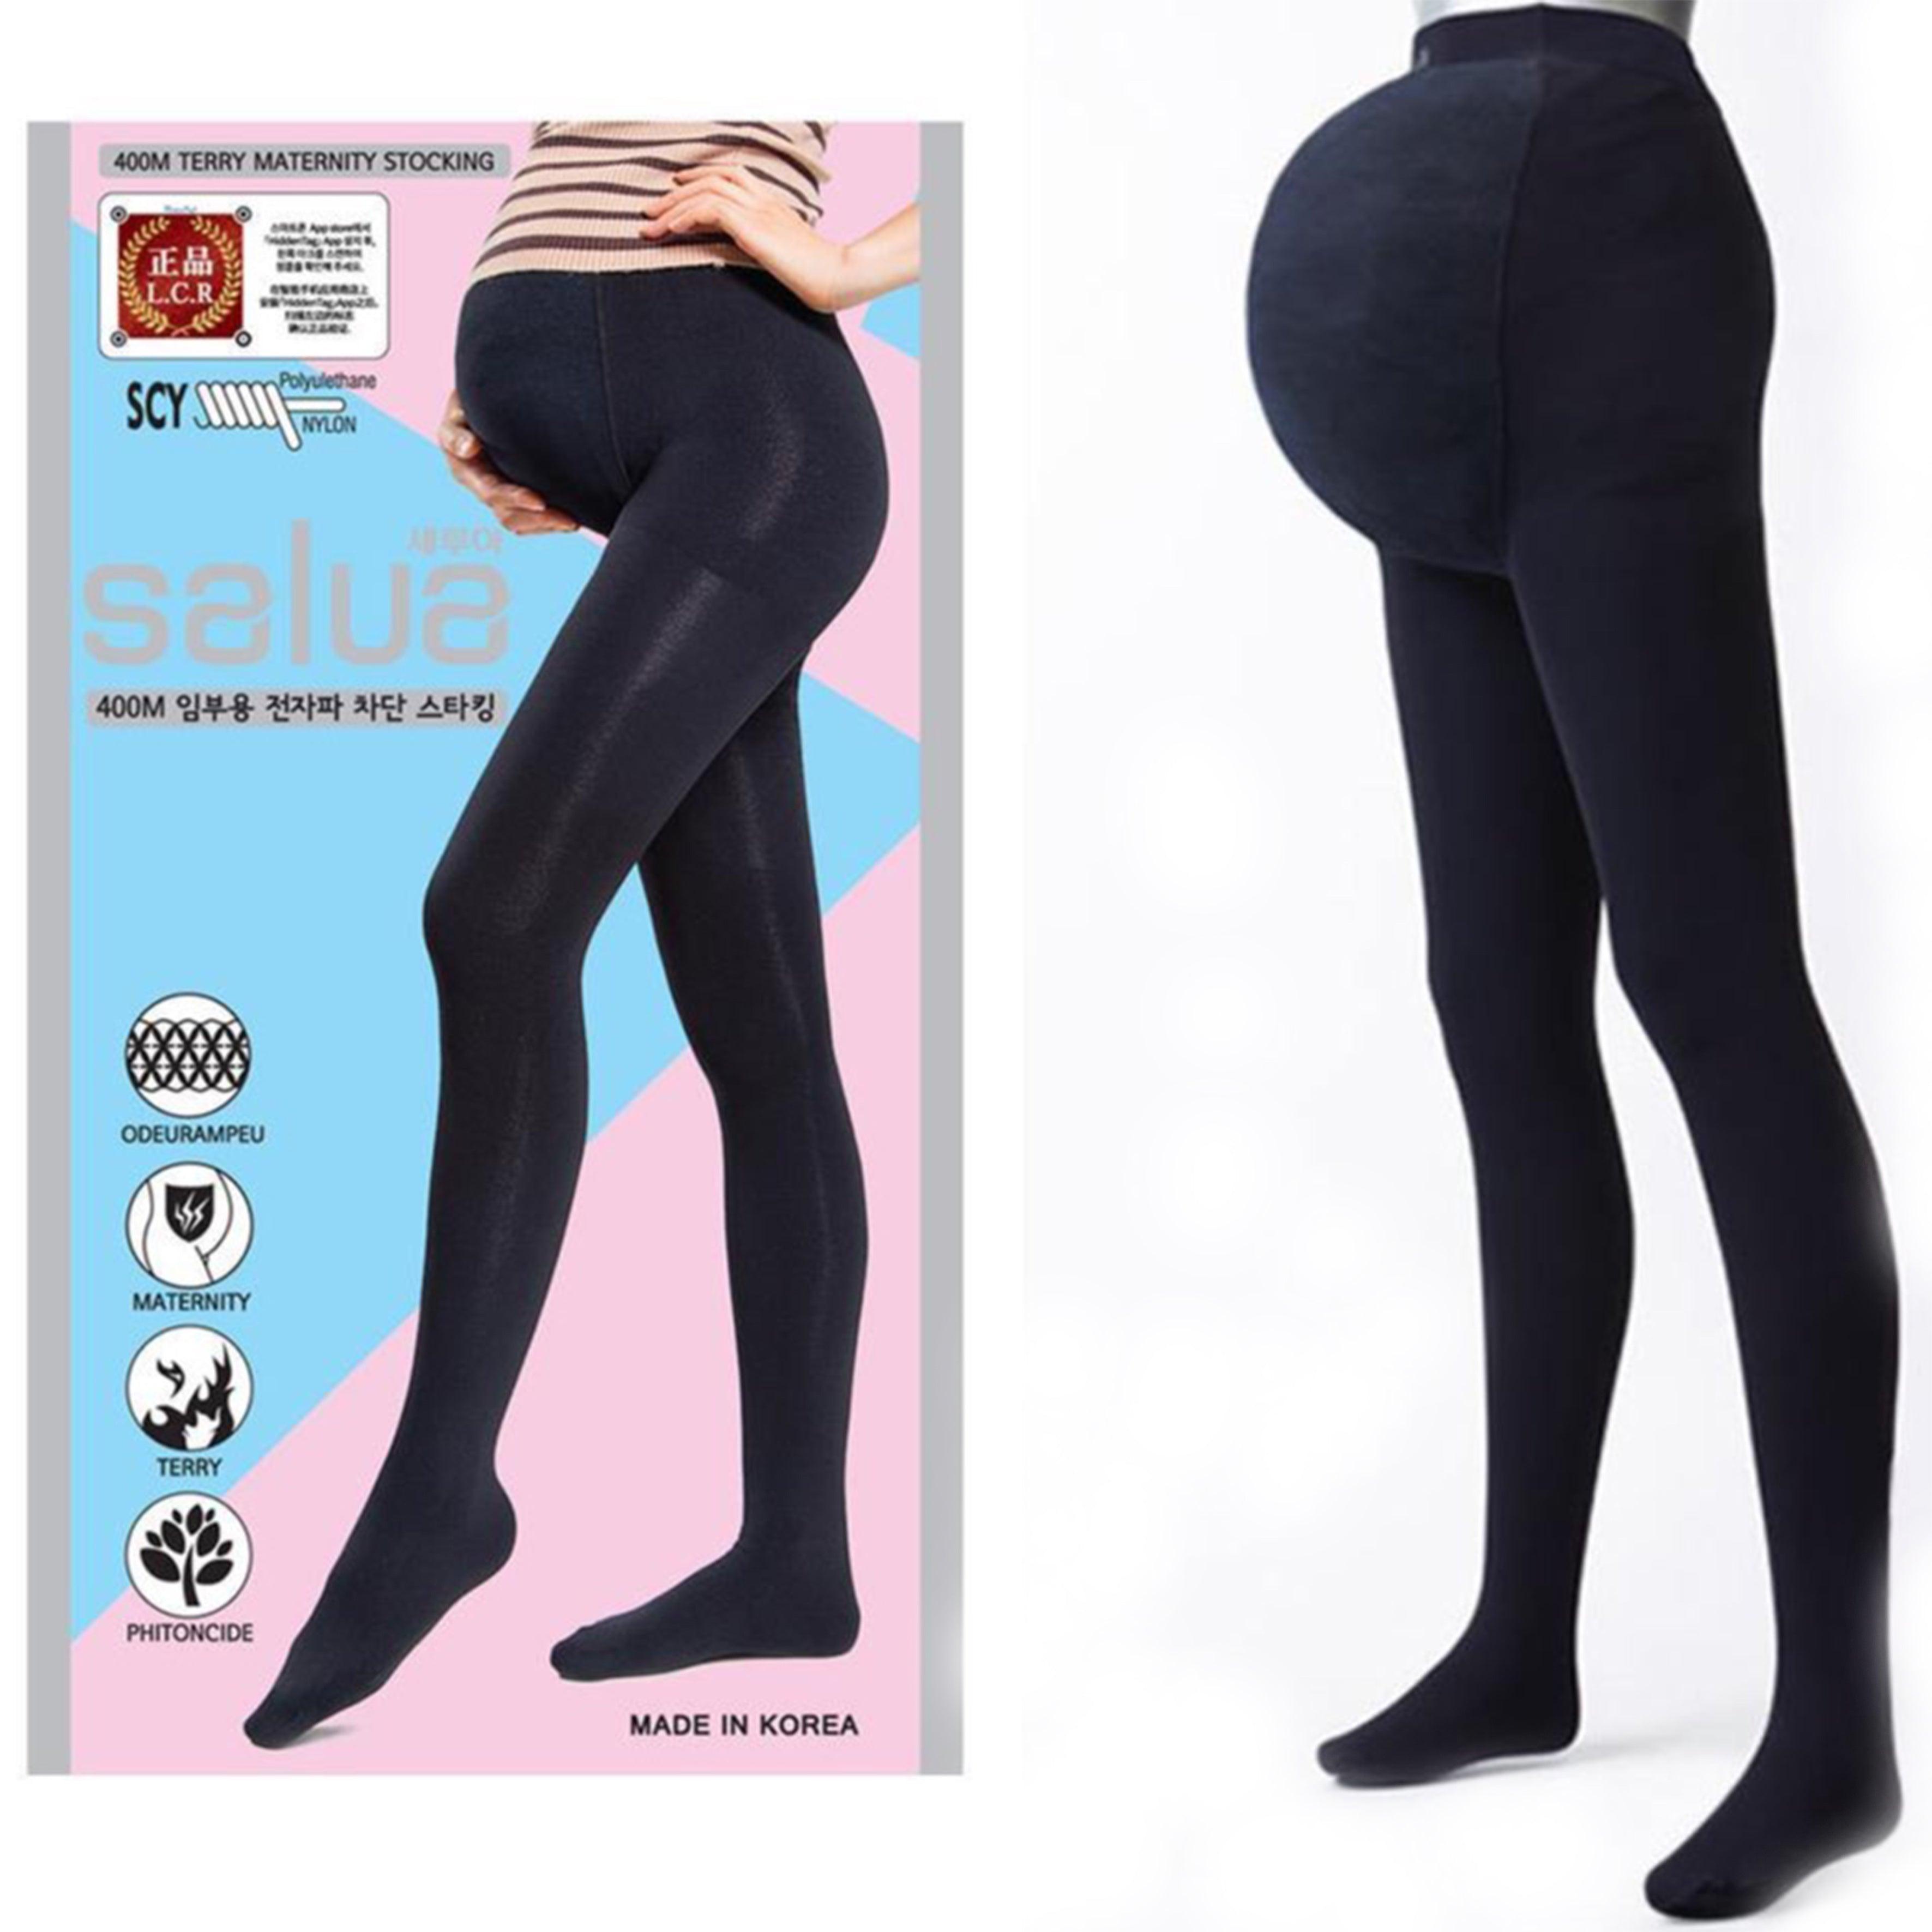 TheRY graduated compression socks and maternity leggings